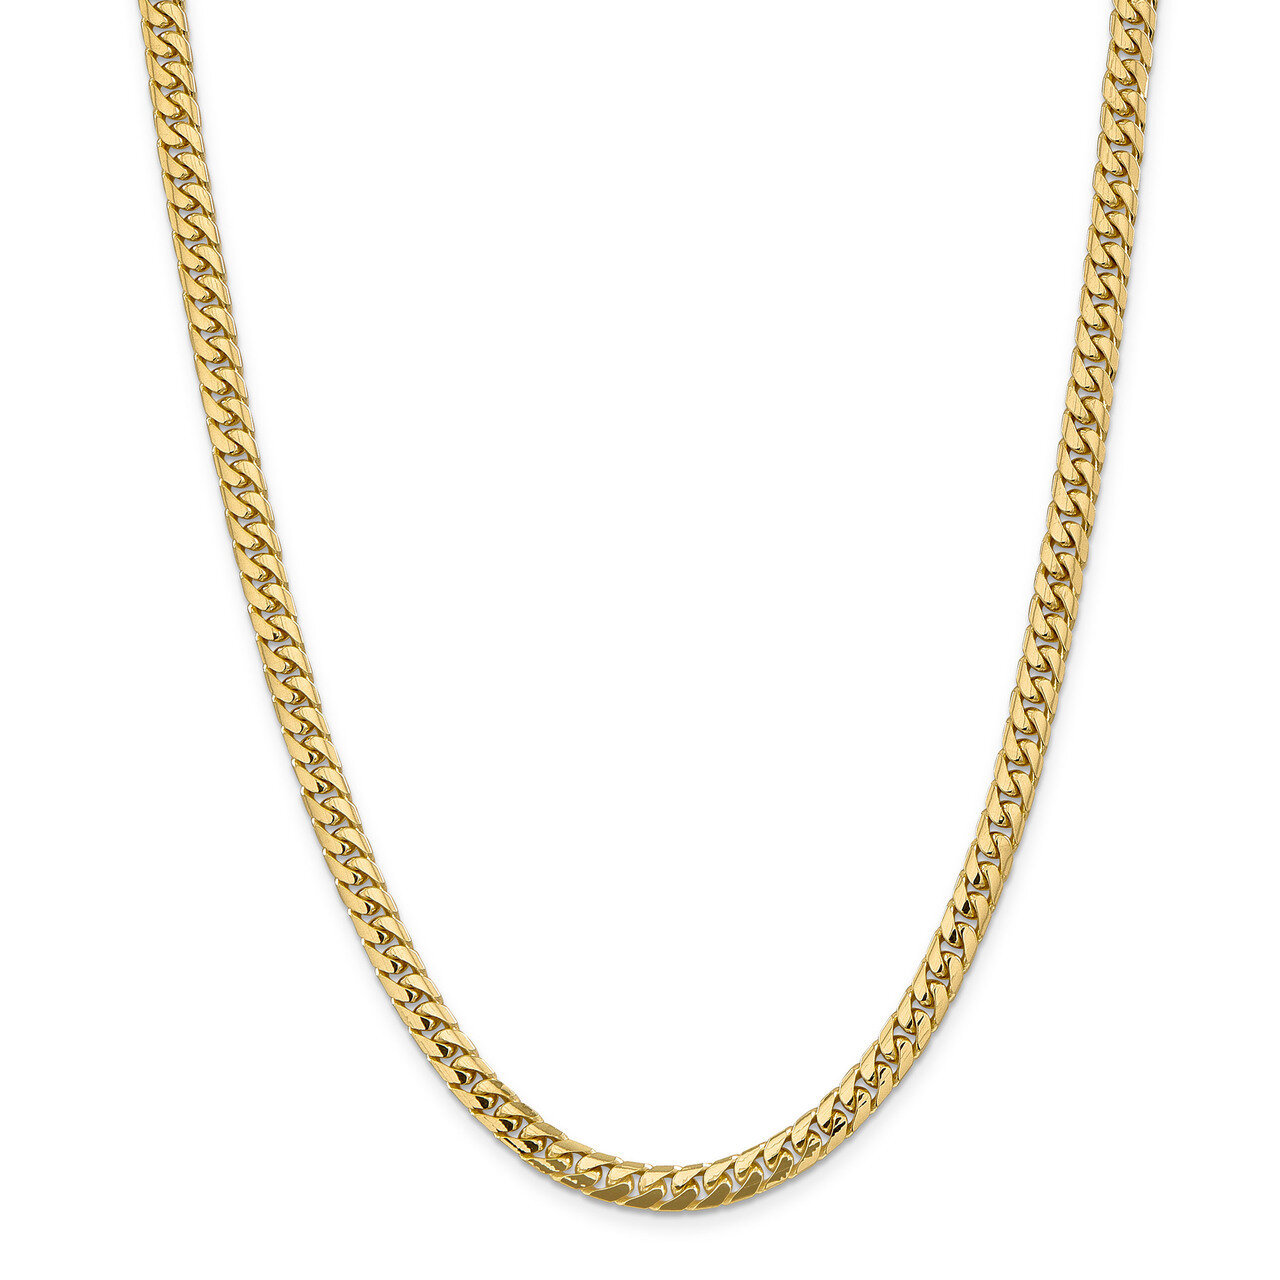 24 Inch 5.5mm Domed Curb Chain 14k Gold DCU180-24